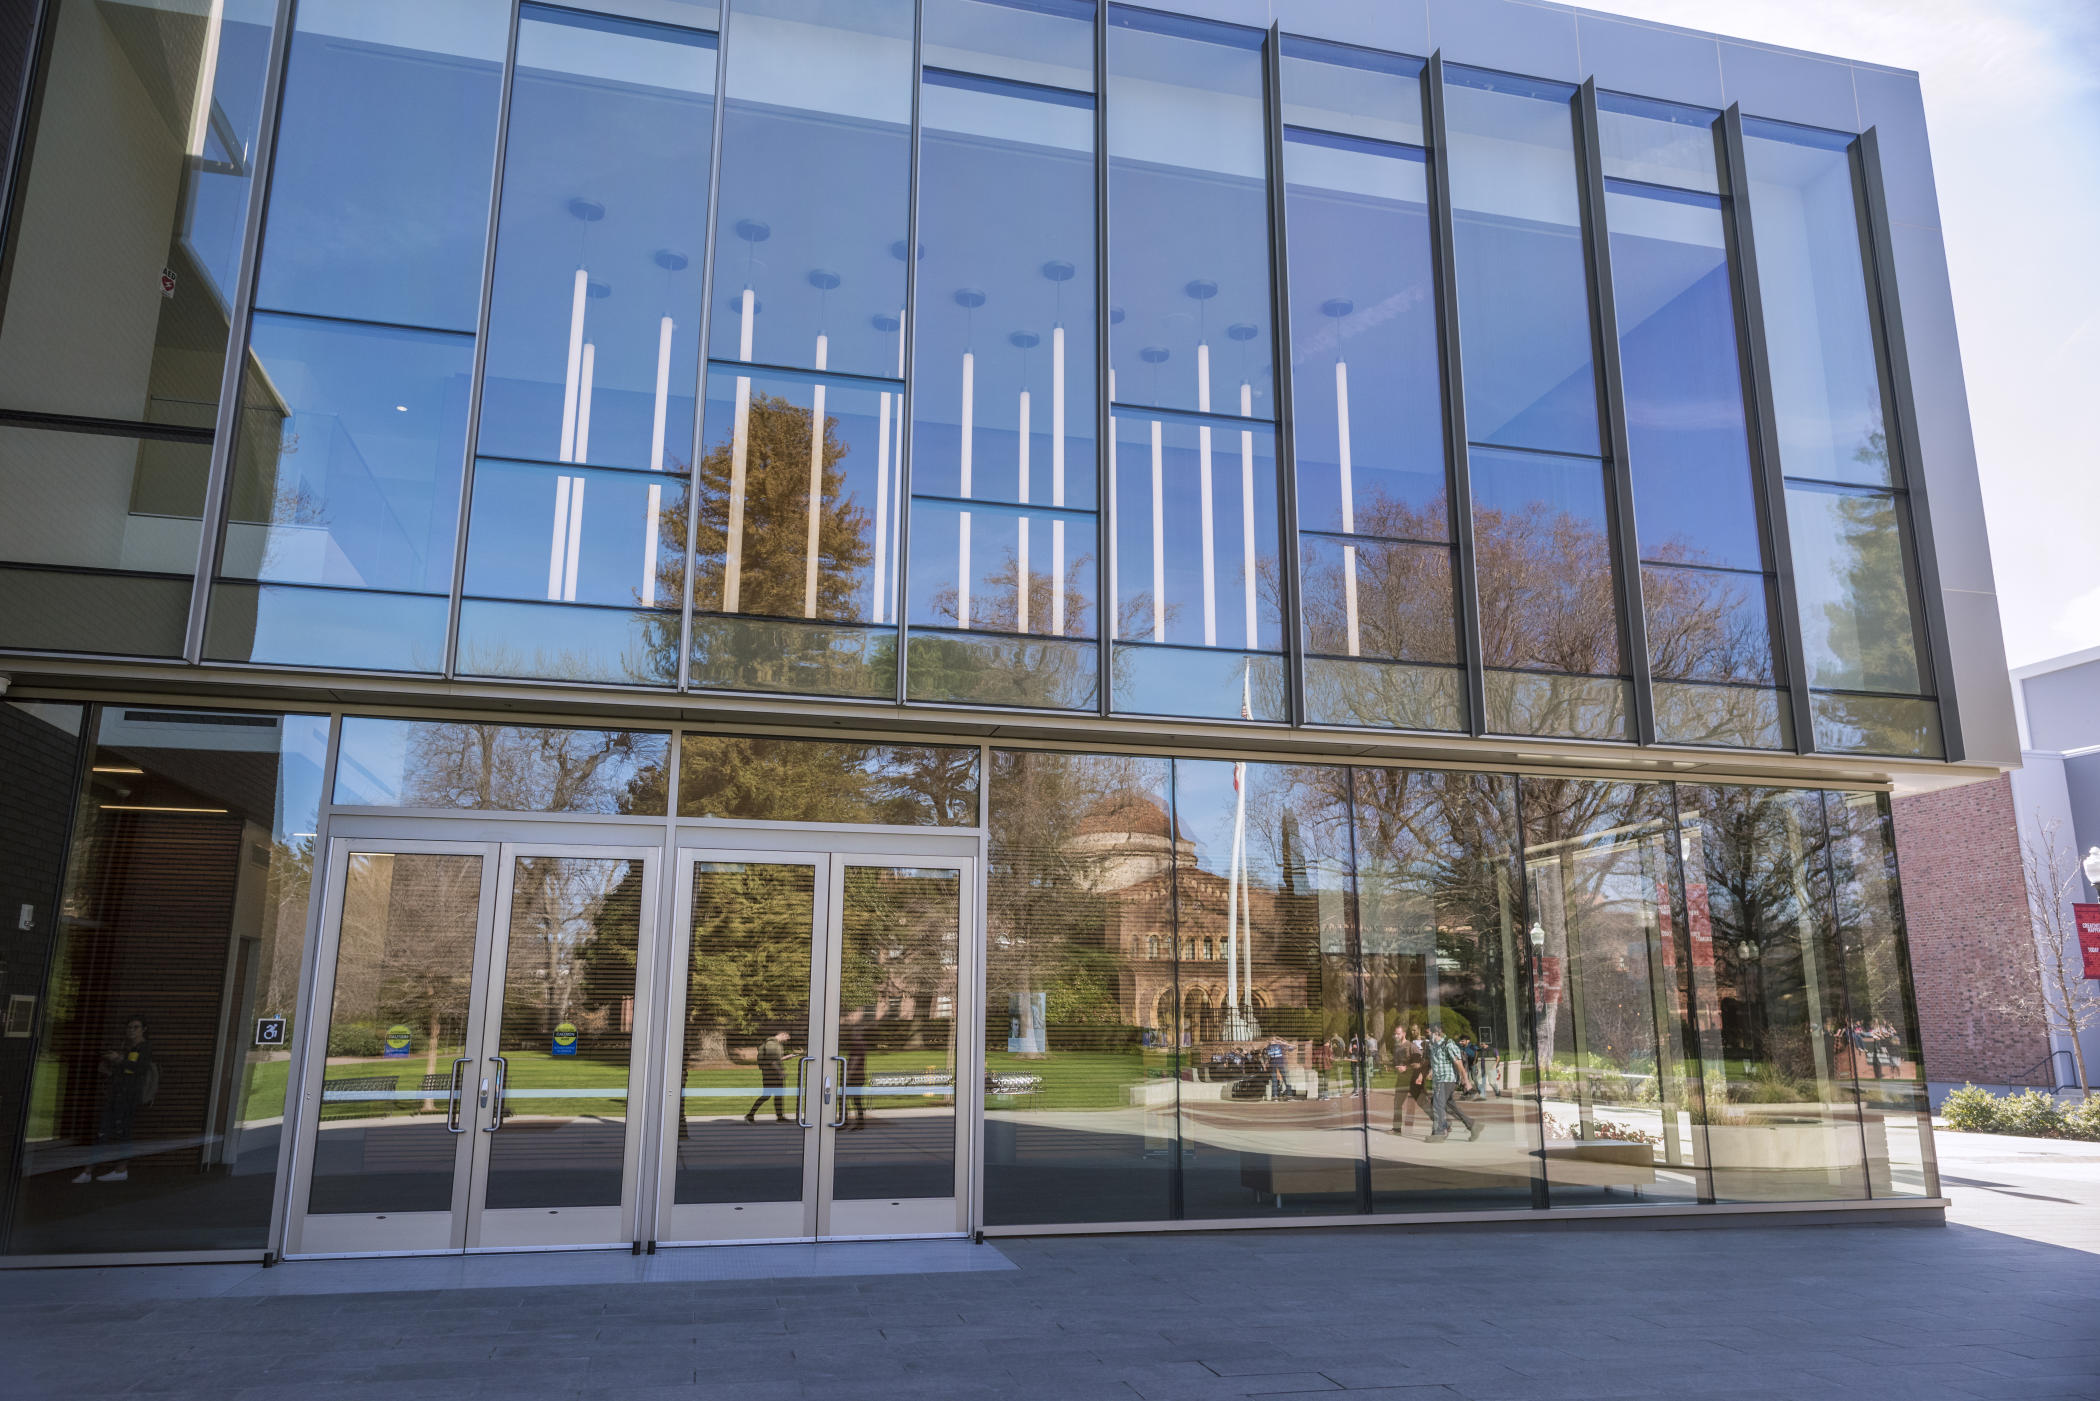 Kendall Hall is reflected in the front windows of the Arts and Humanities building on a winter morning.